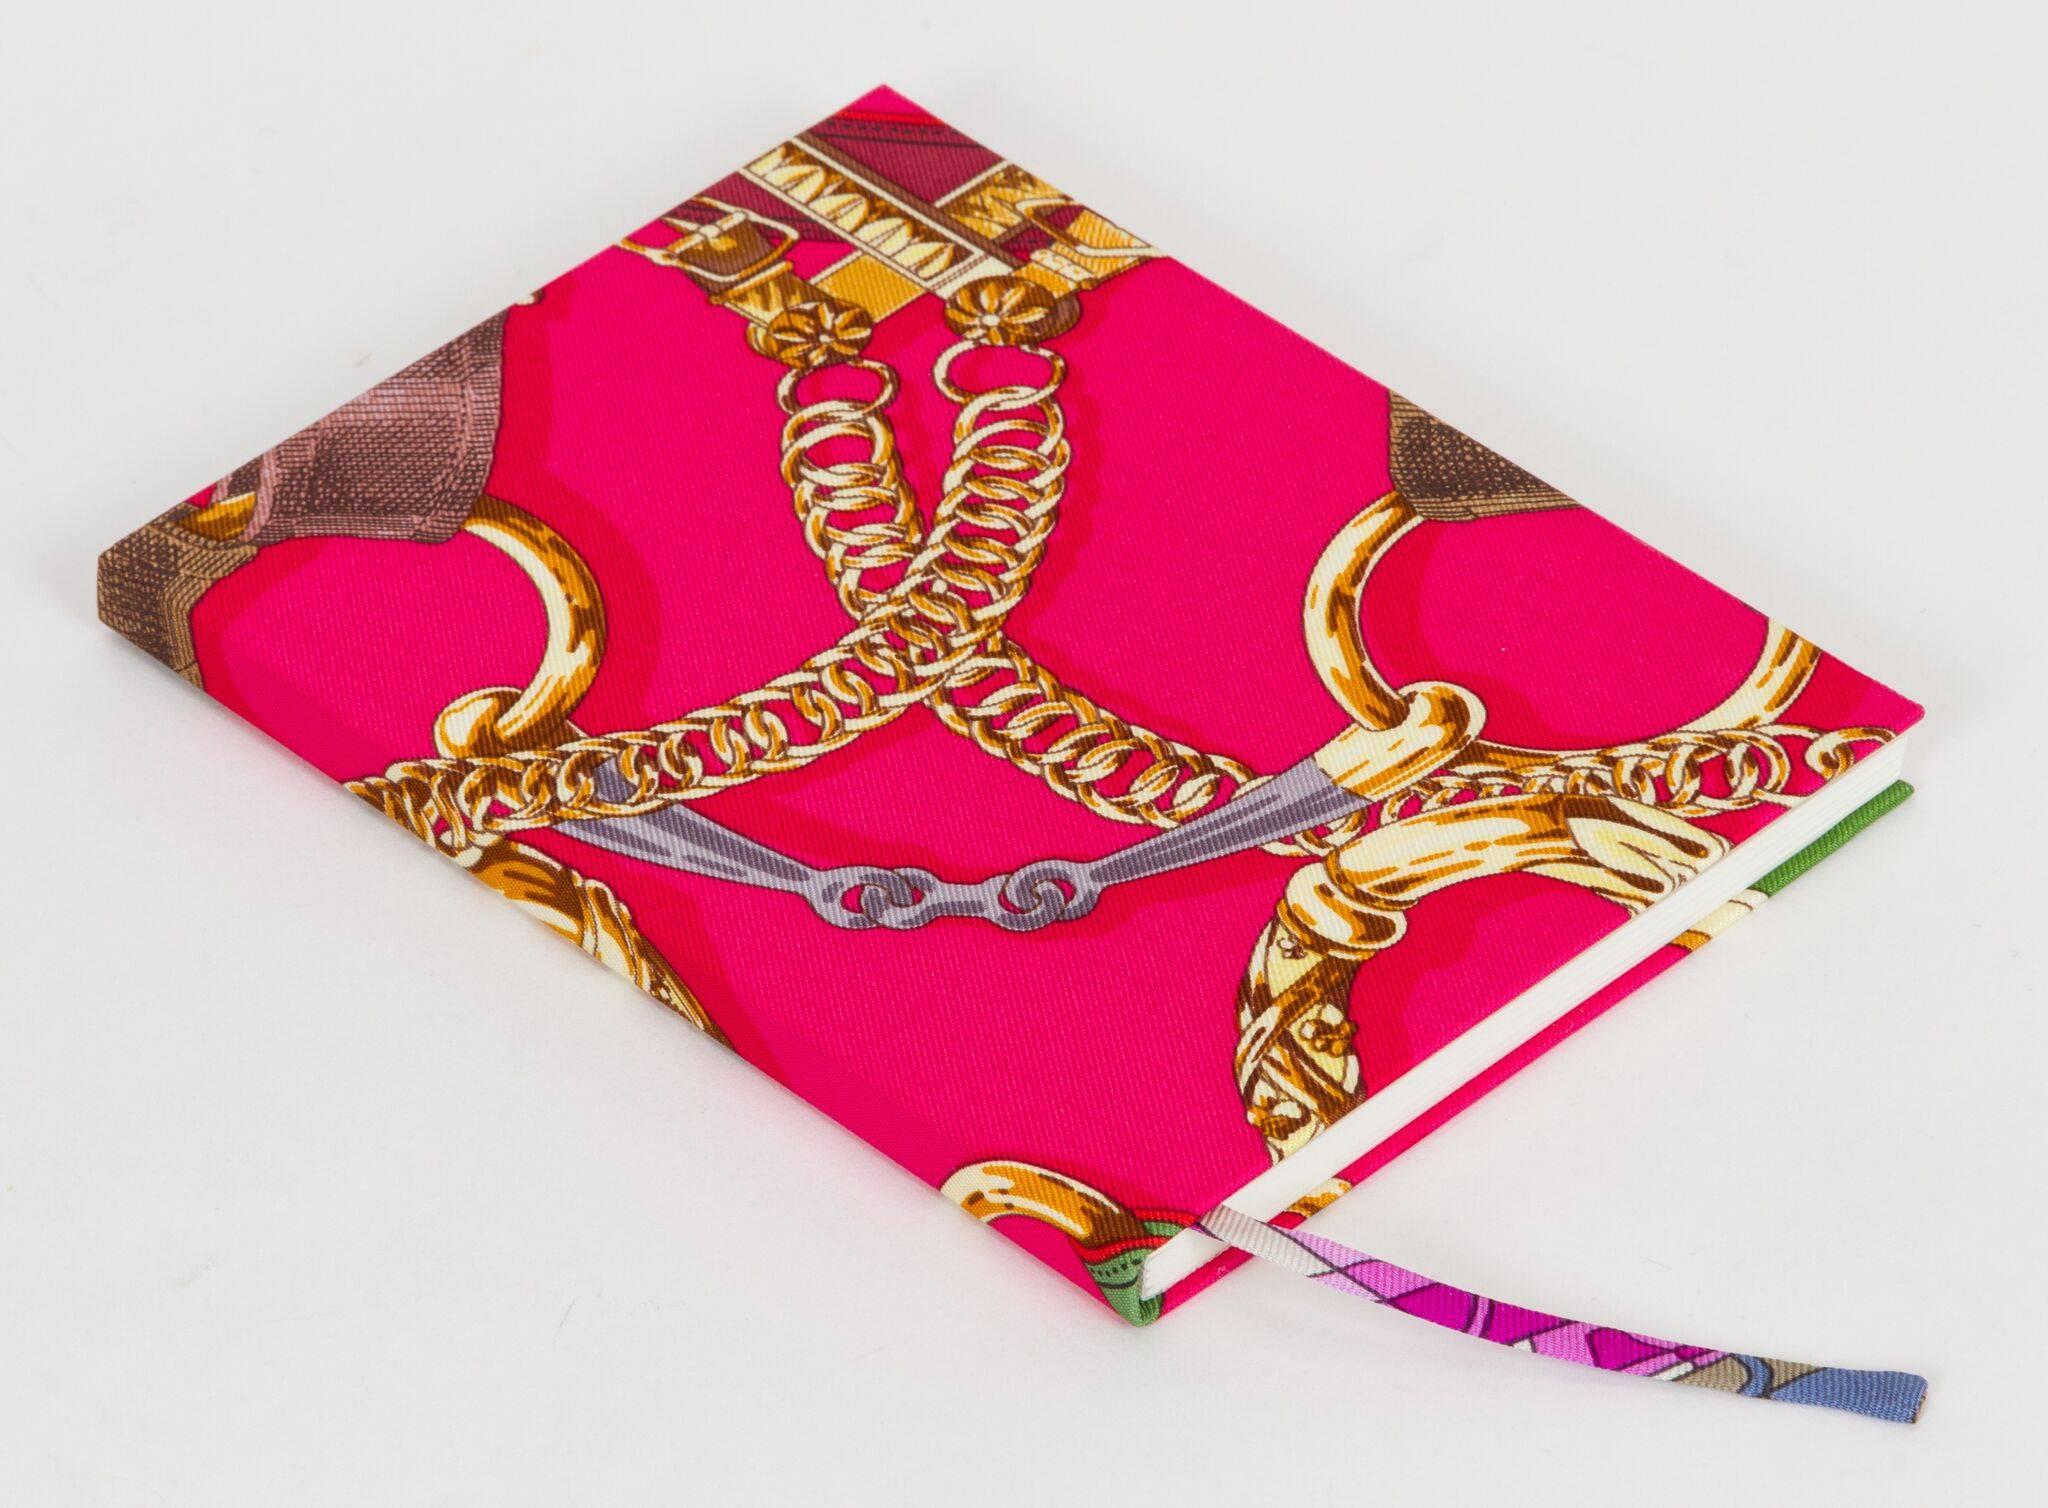 Hermès fuchsia chains silk notebook. Never used. Comes with original box, ribbon, and gift bag.